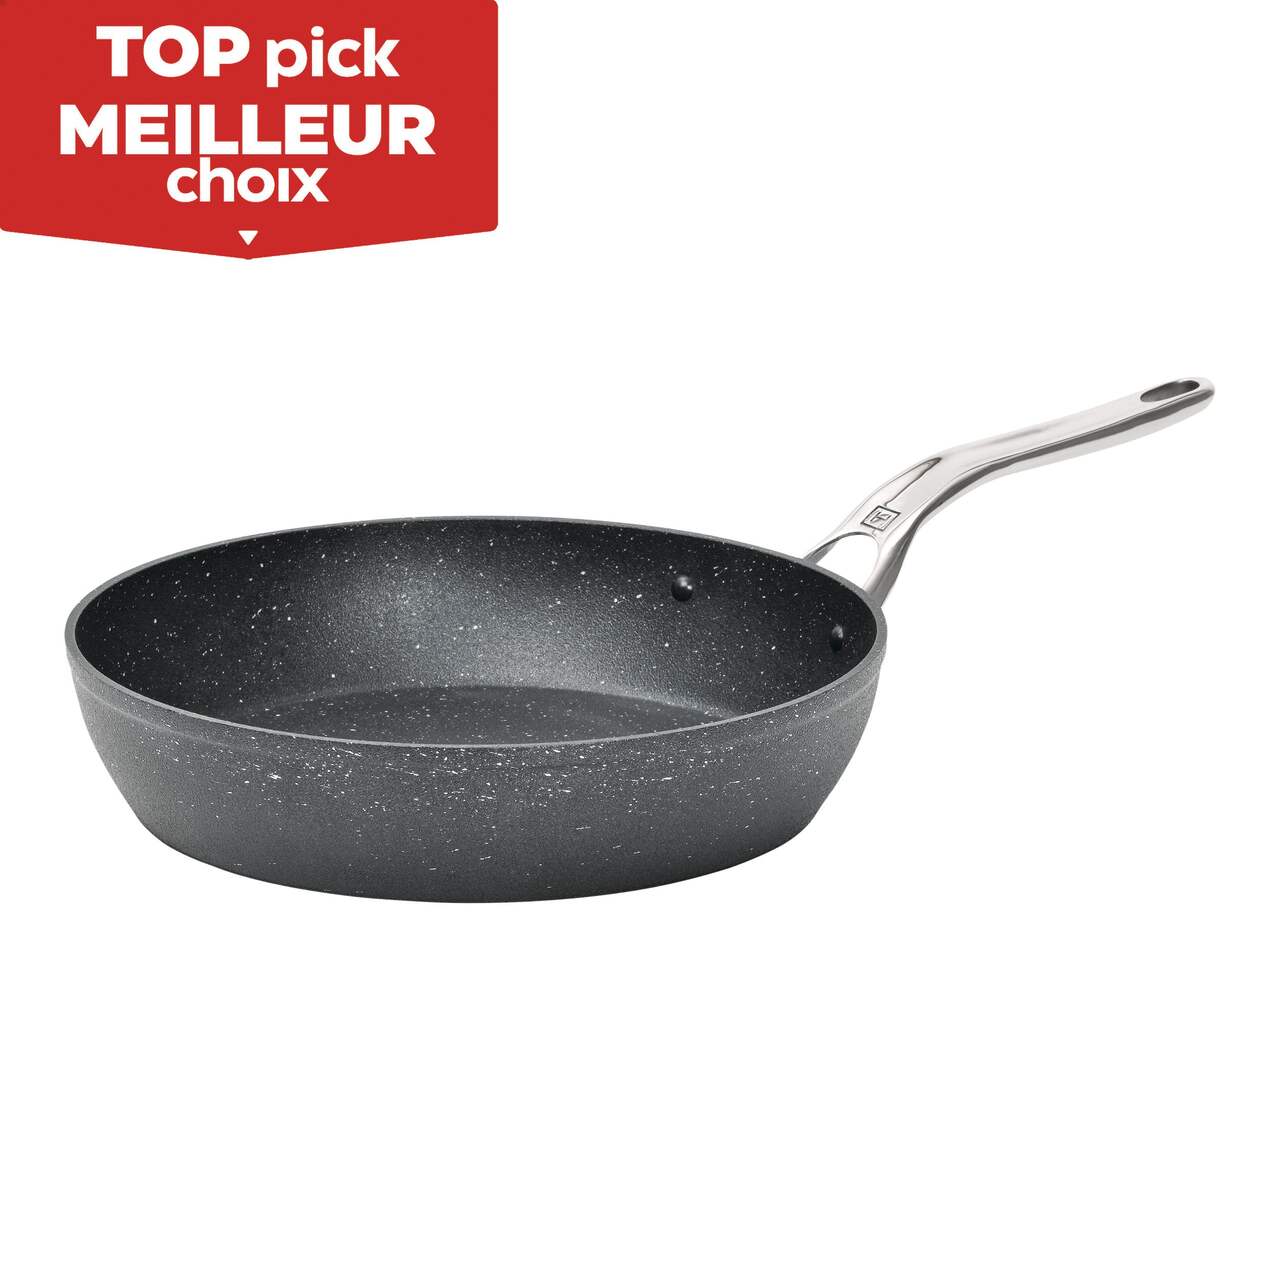 https://media-www.canadiantire.ca/product/living/kitchen/cookware/1427073/heritage-rock-30cm-non-stick-frypan-a1d8f789-3587-4cb5-ad53-740b659869c1-jpgrendition.jpg?imdensity=1&imwidth=640&impolicy=mZoom